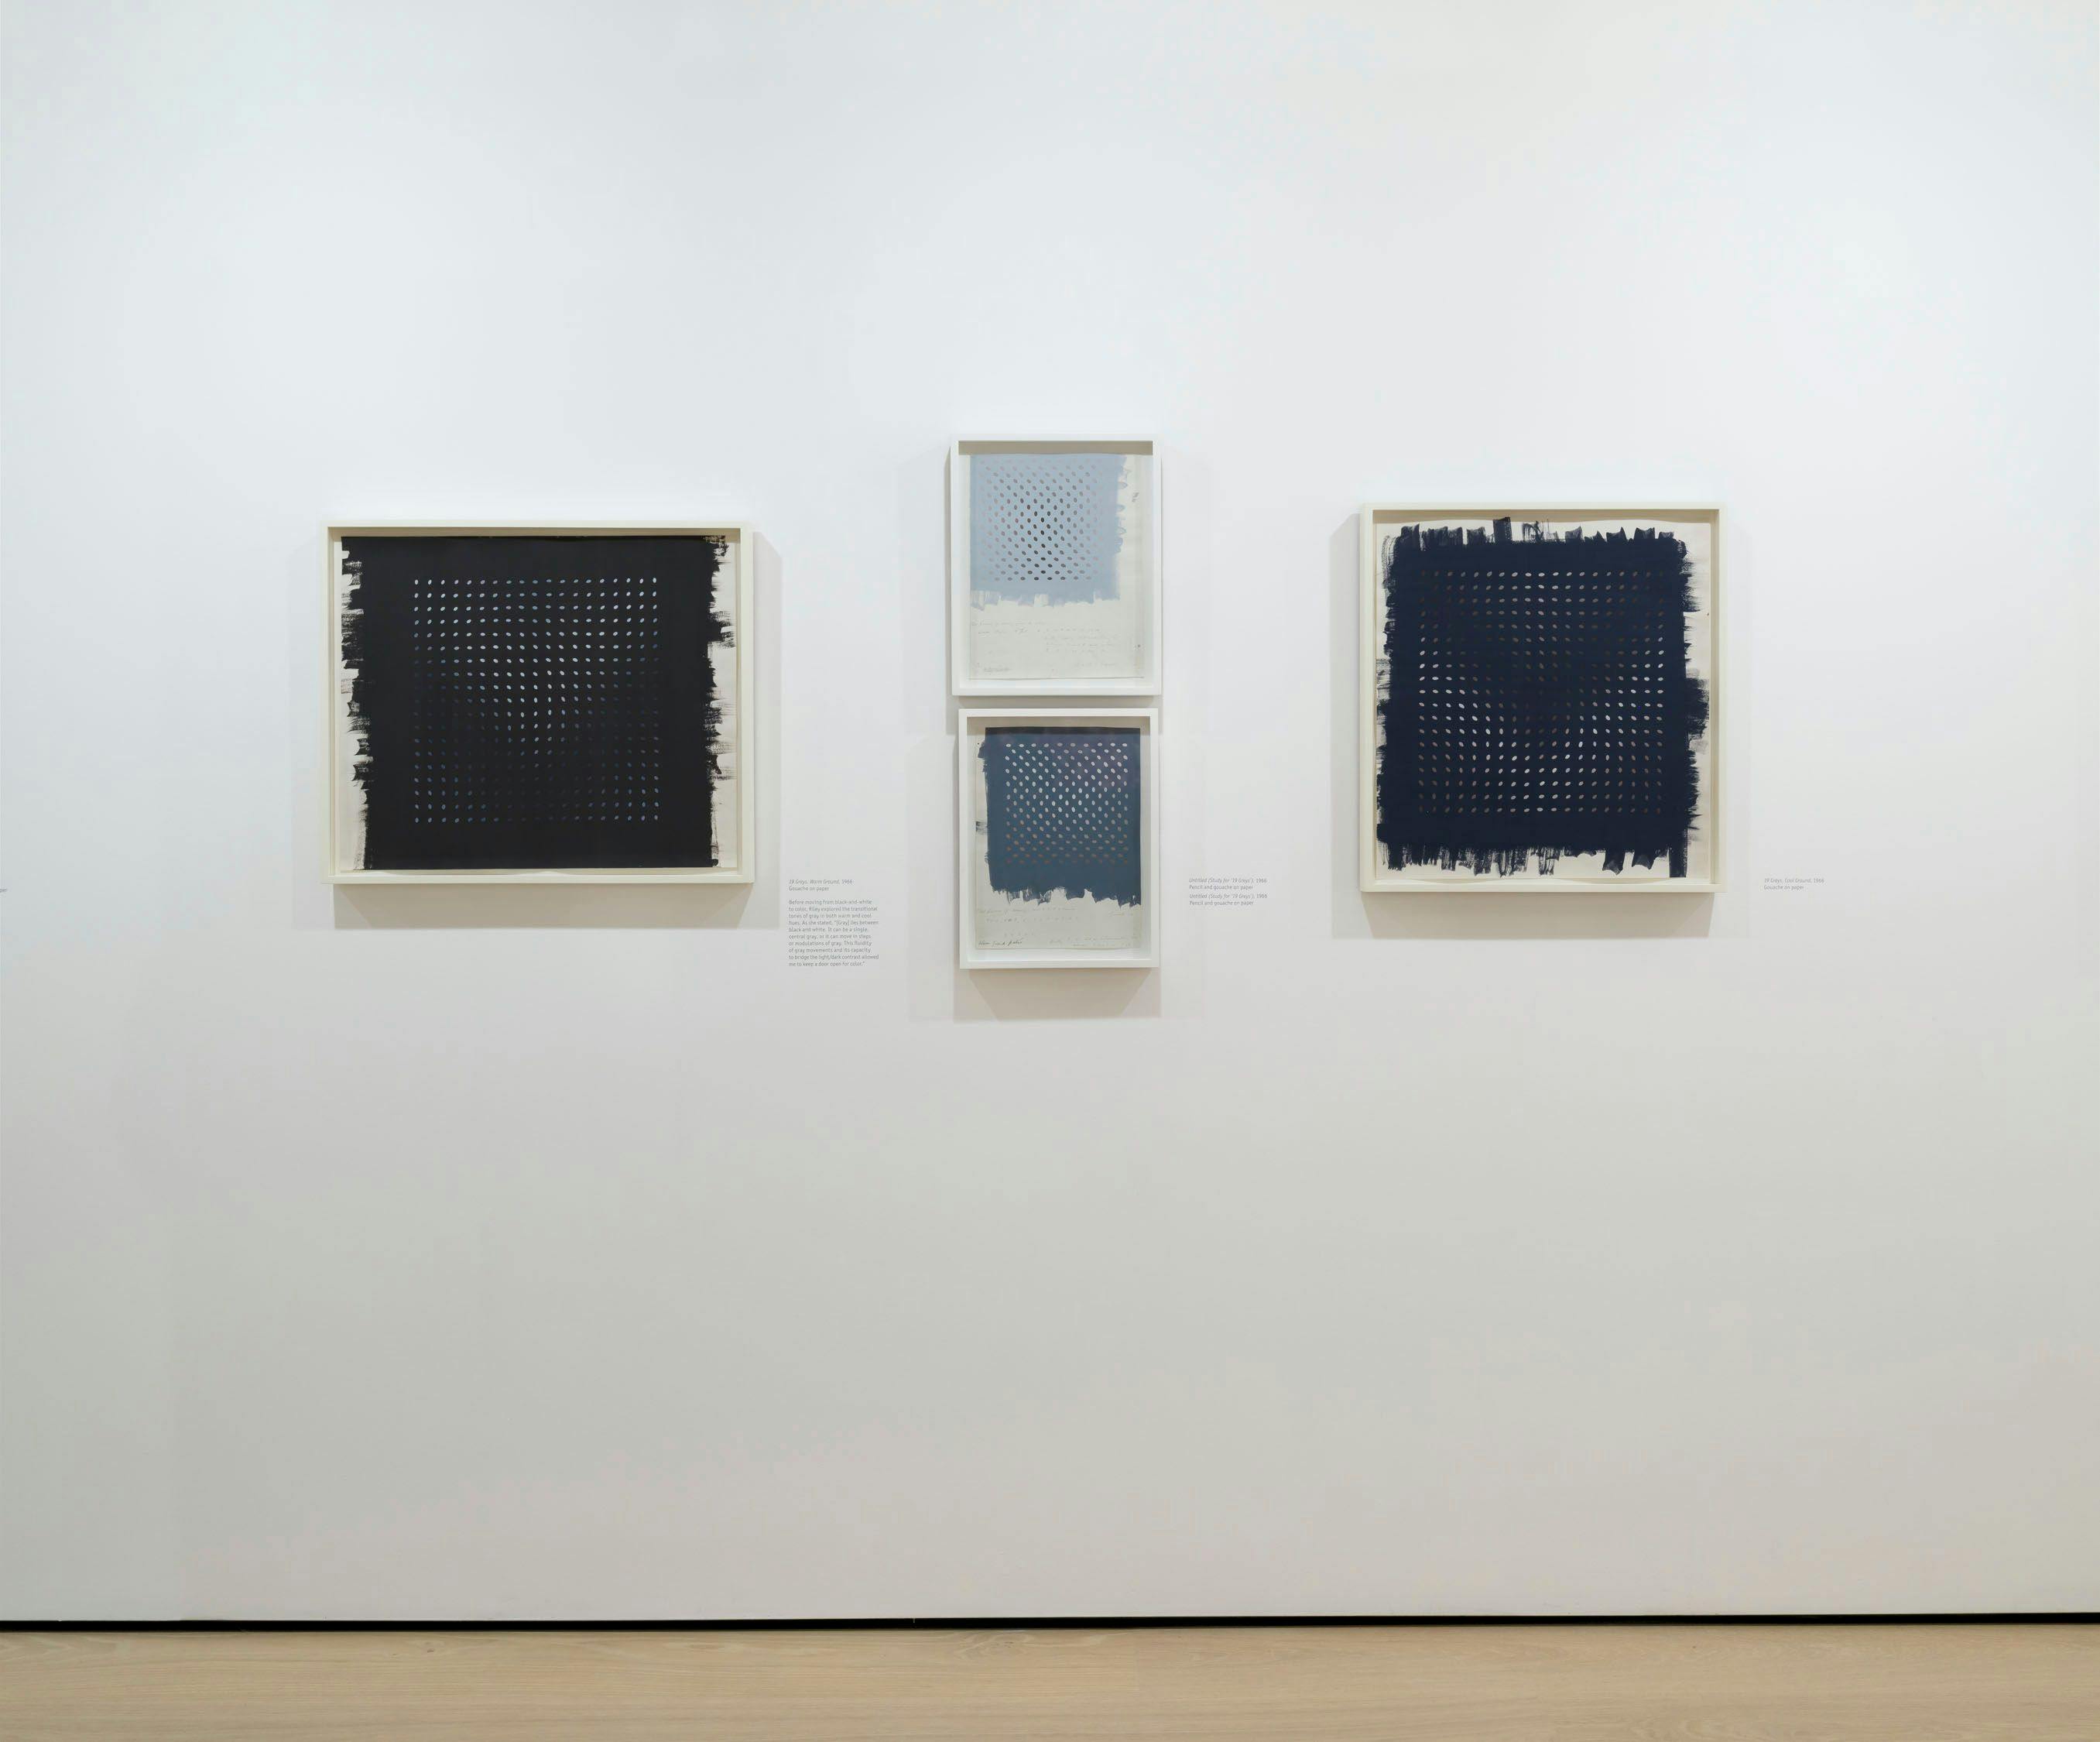 Installation view of the exhibition, Bridget Riley Drawings: From the Artist's Studio, at The Hammer Museum in Los Angeles, dated 2023.